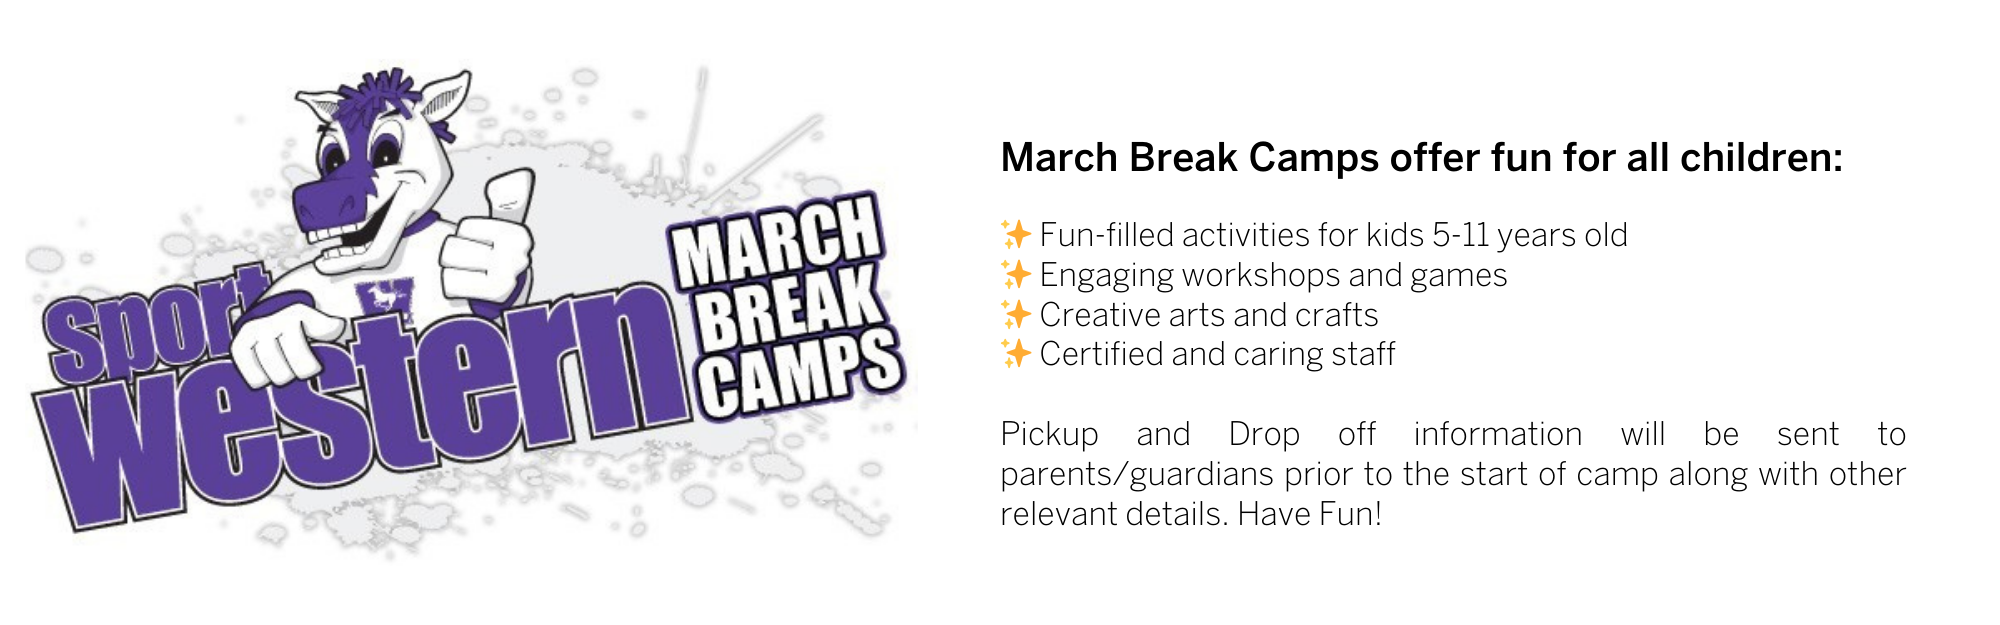 March Break Camps: ✨ Fun-filled activities for kids 5-11 years old ✨ Engaging workshops and games ✨ Creative arts and crafts ✨ Certified and caring staff